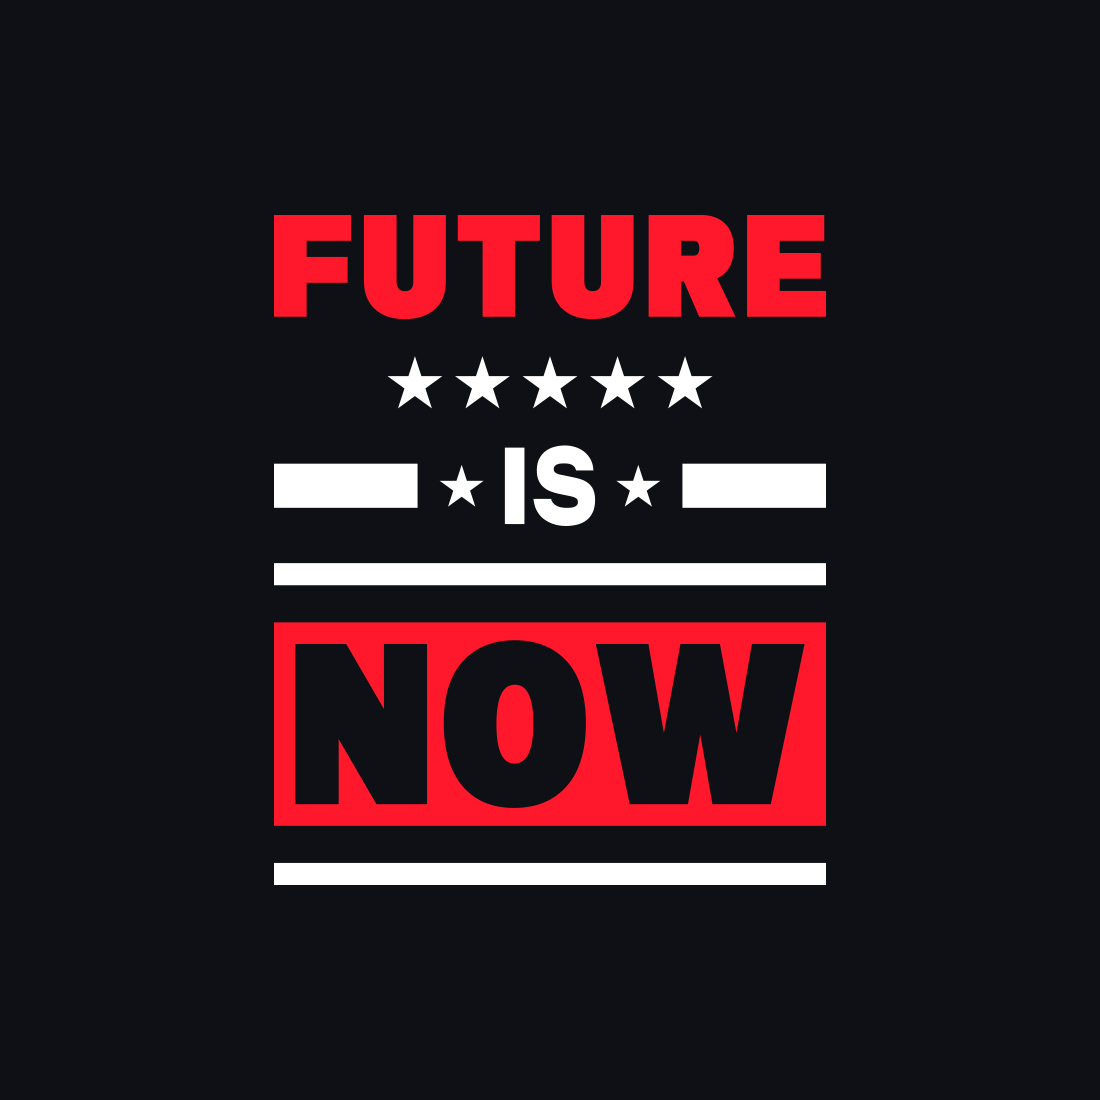 Image with gorgeous "future is now" caption in red and white and black colors.